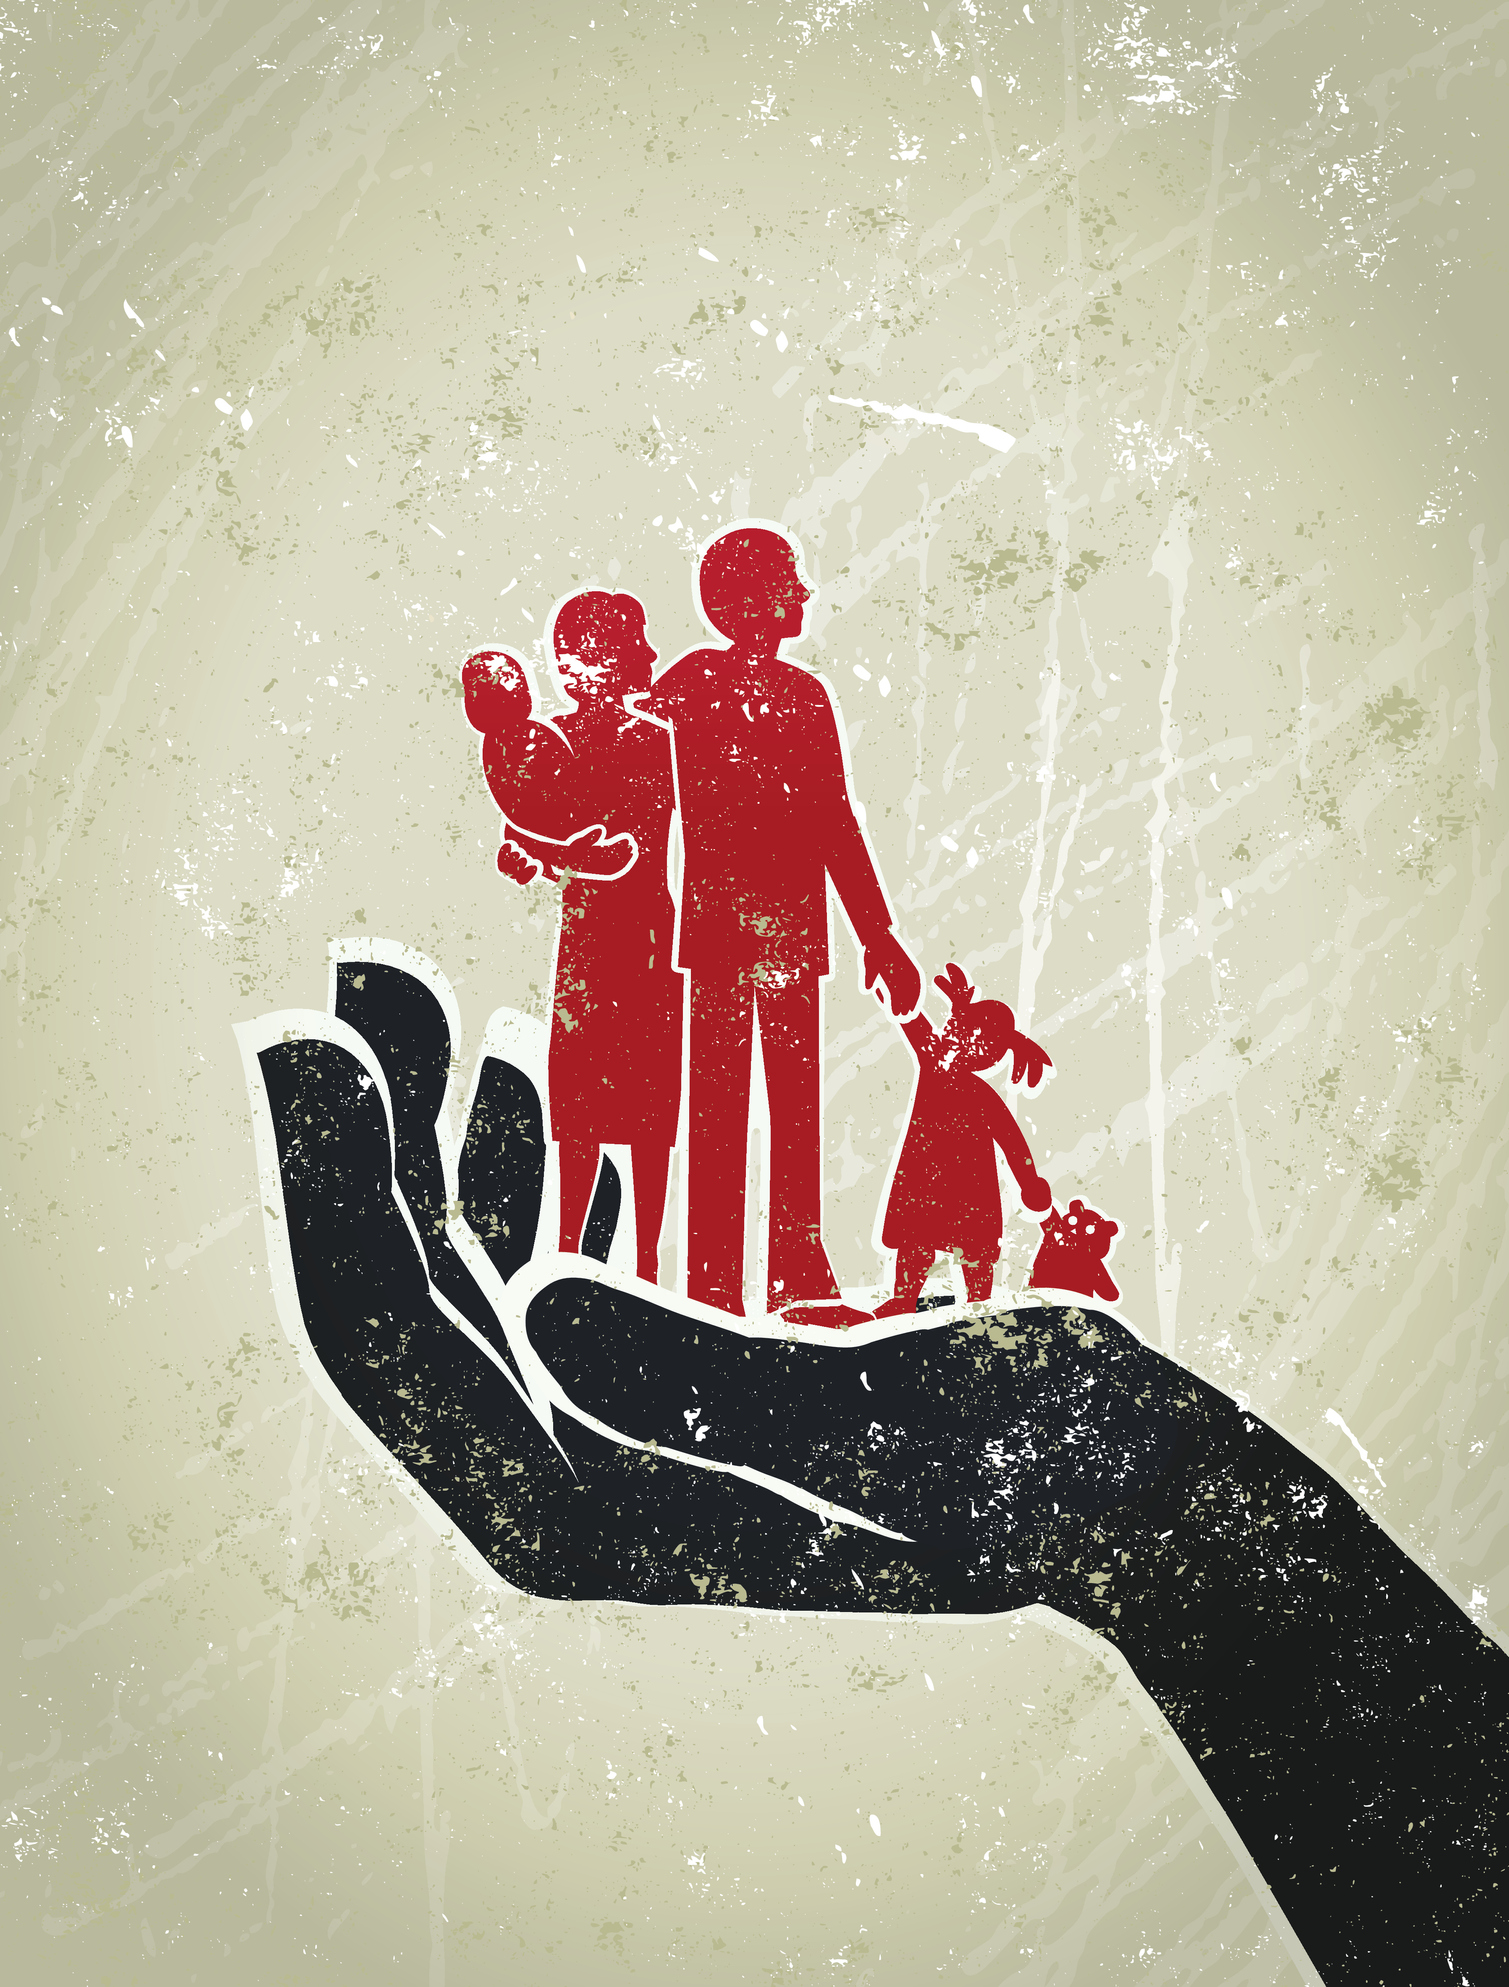 Parents, Children Standing on a Giant Protective Hand